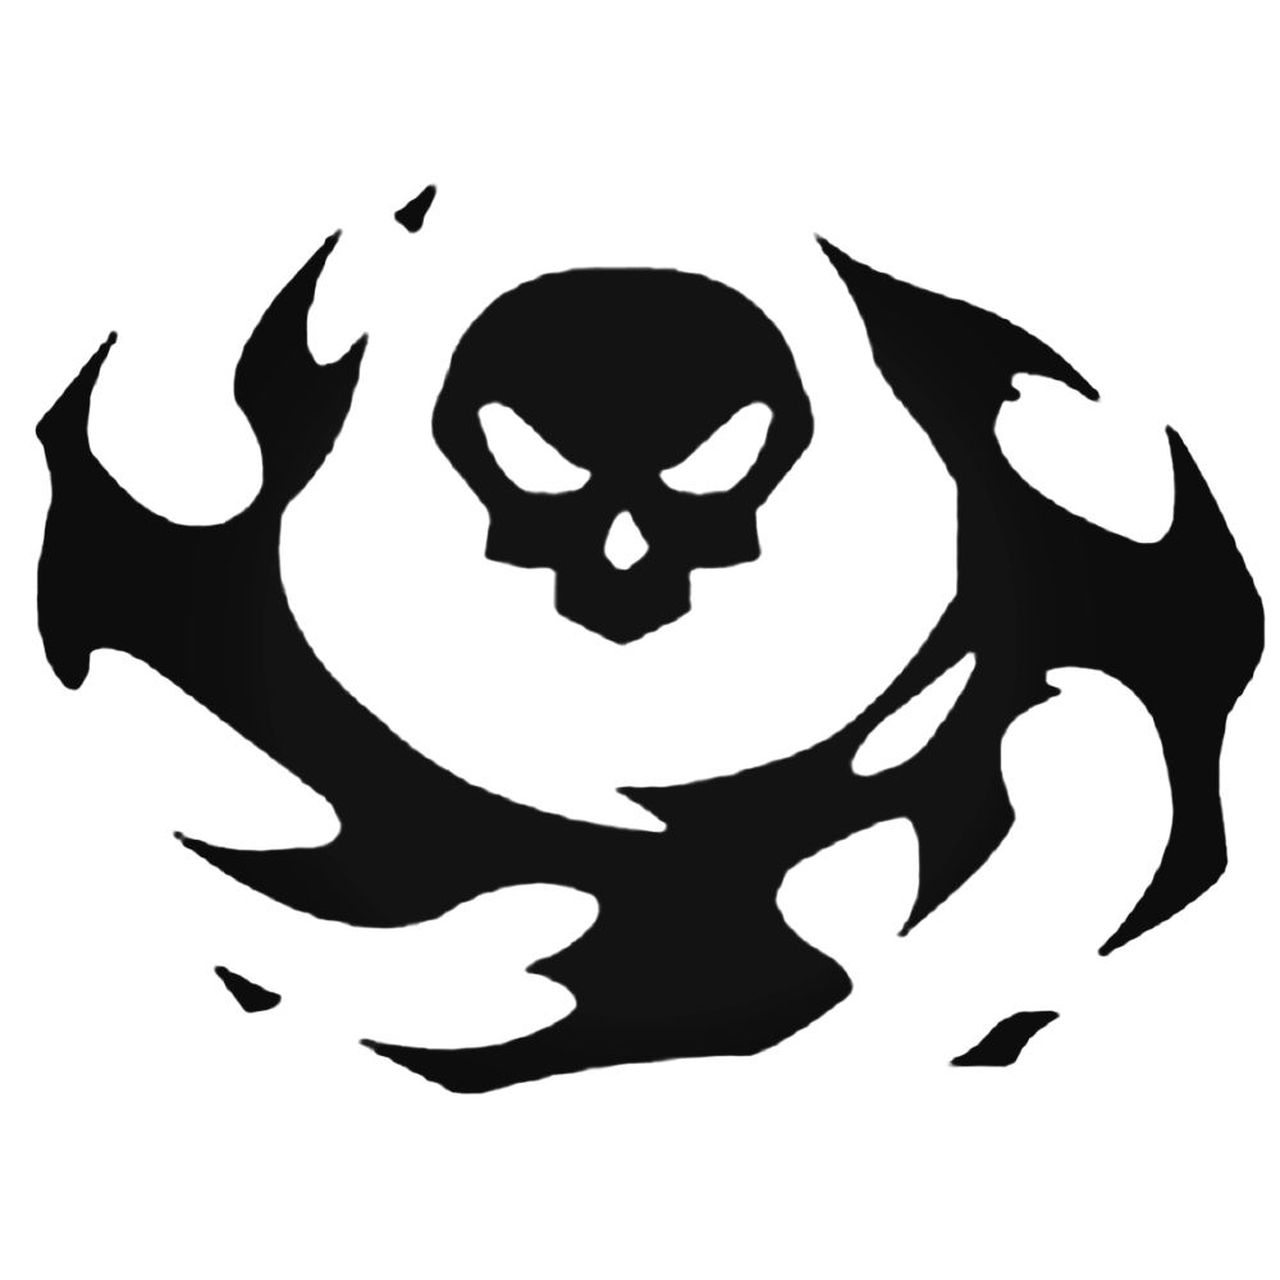 Reaper Overwatch Icon at Vectorified.com | Collection of Reaper ...